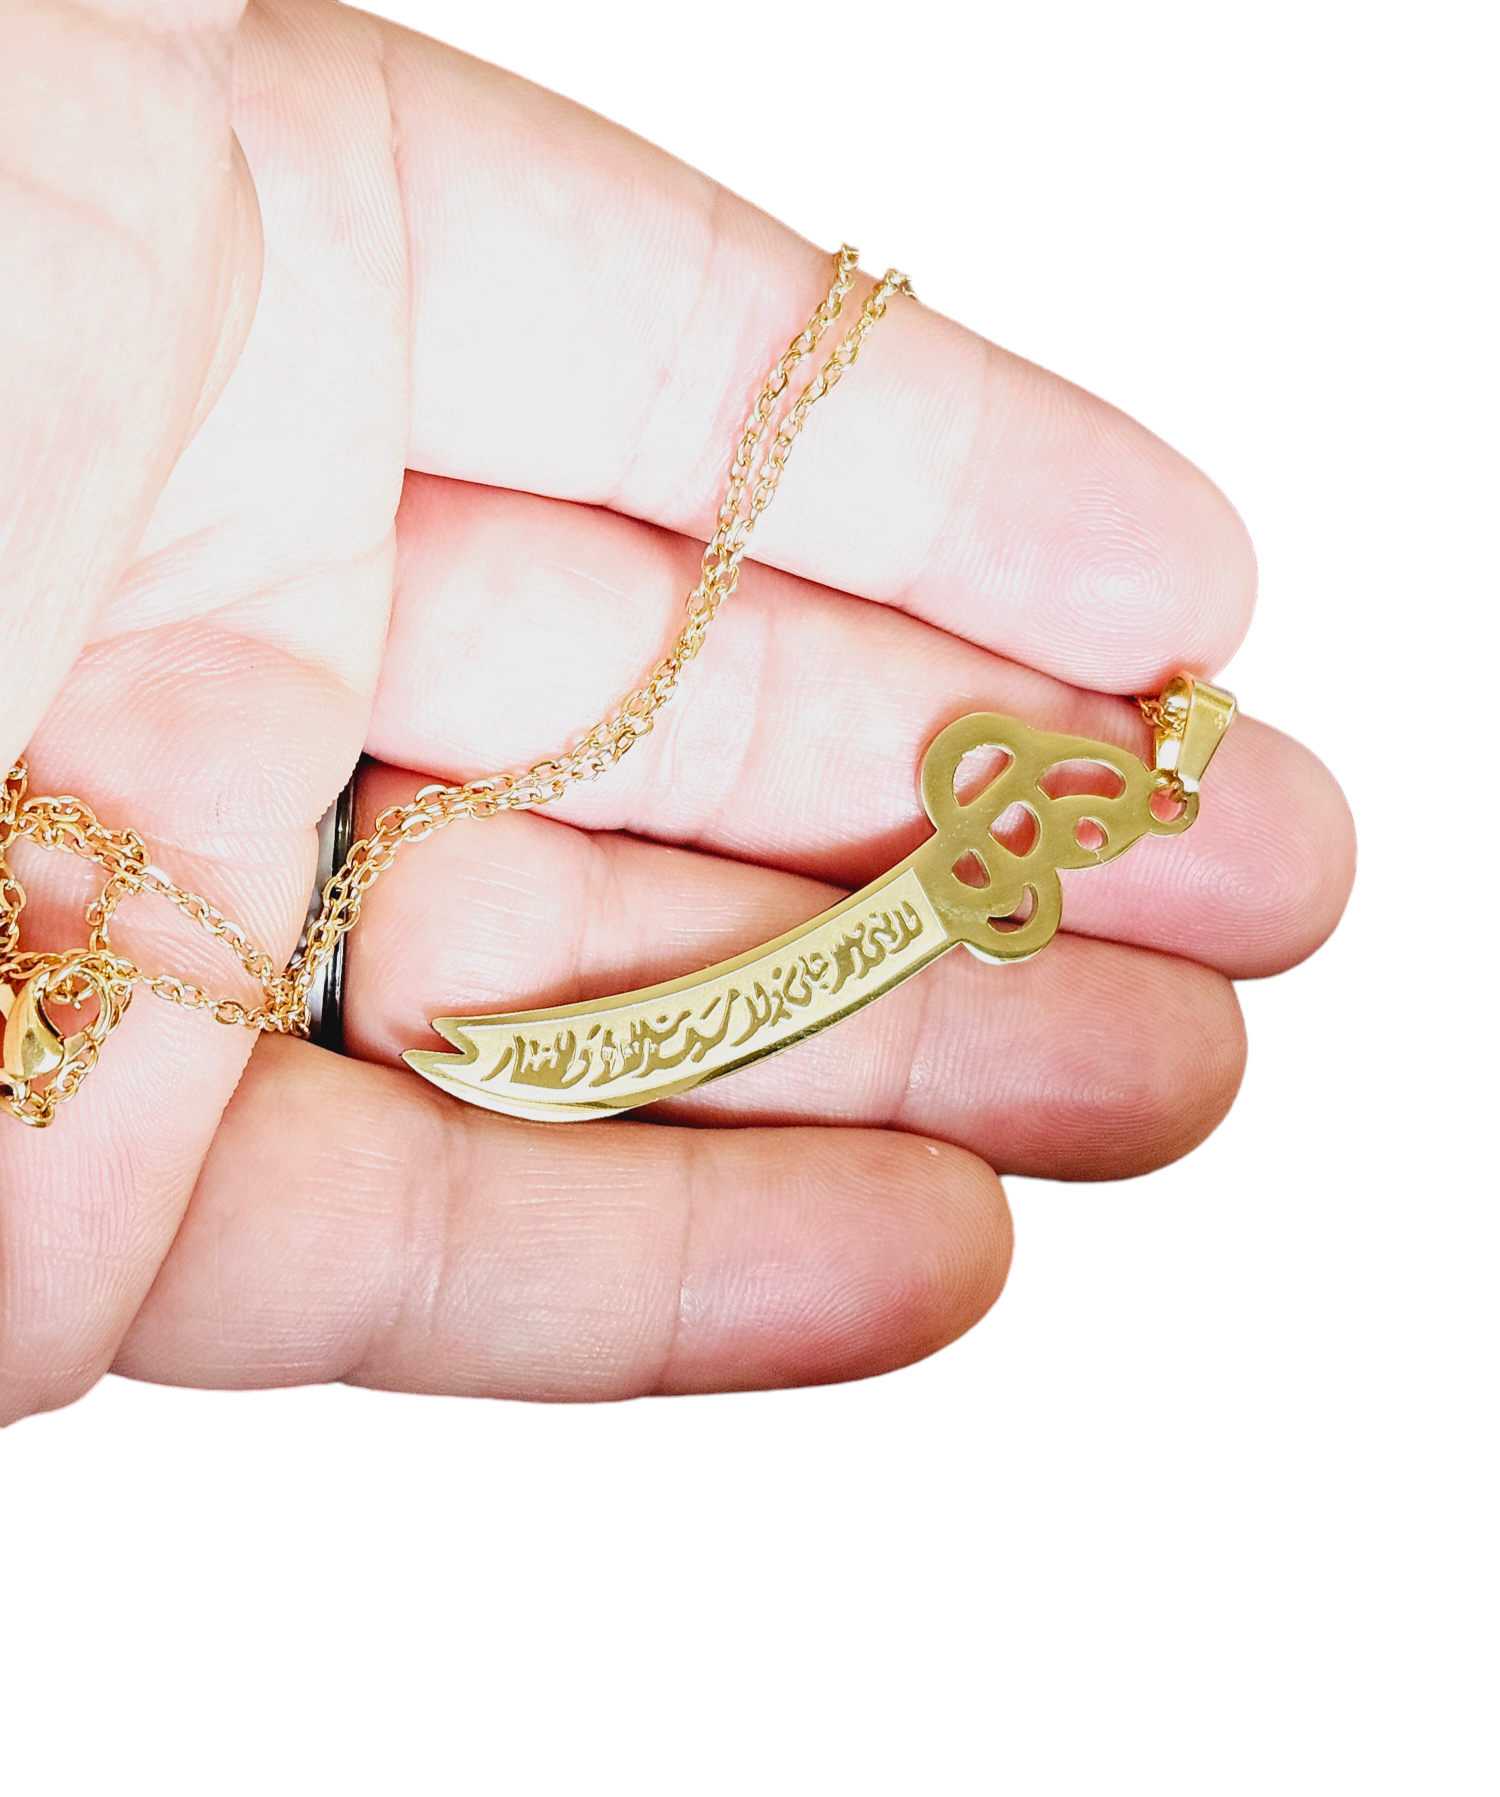 "There is no boy but Ali and no sword but Zulfiqar" Necklace